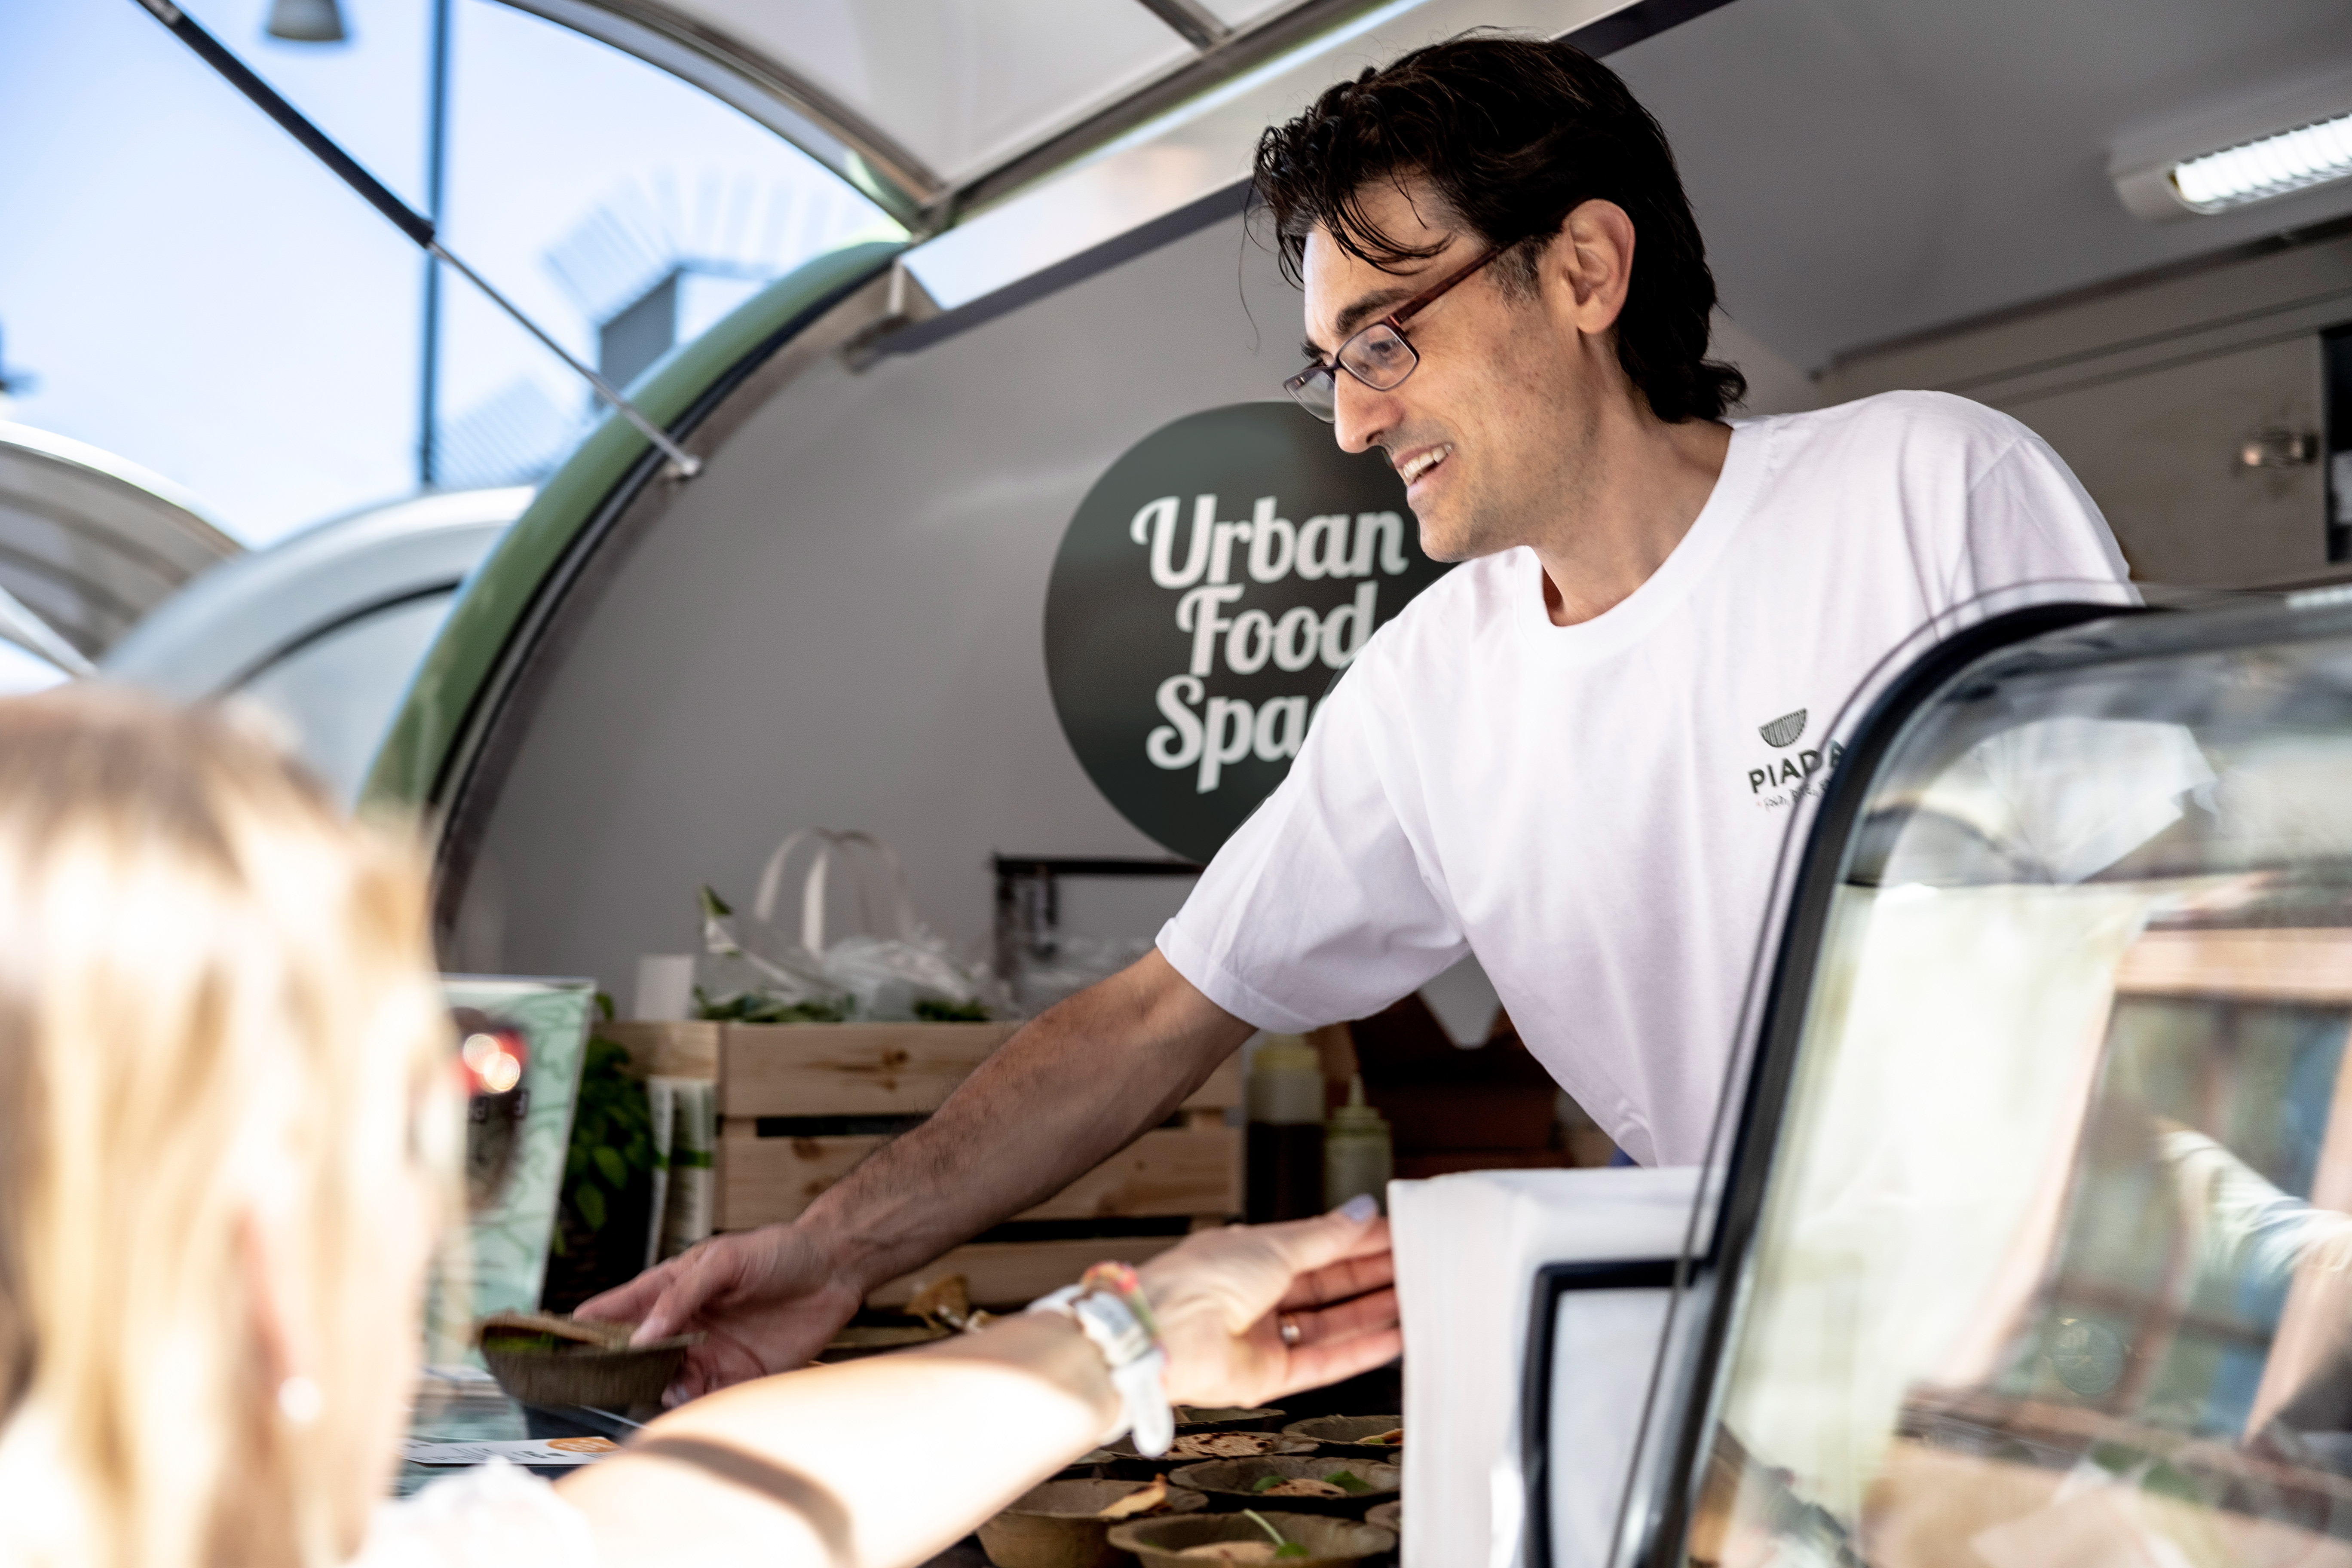 A male coded person in a white t-shirt stands in a food truck serving guests.  Inside the food truck the Urban Food Space logotype is visible.